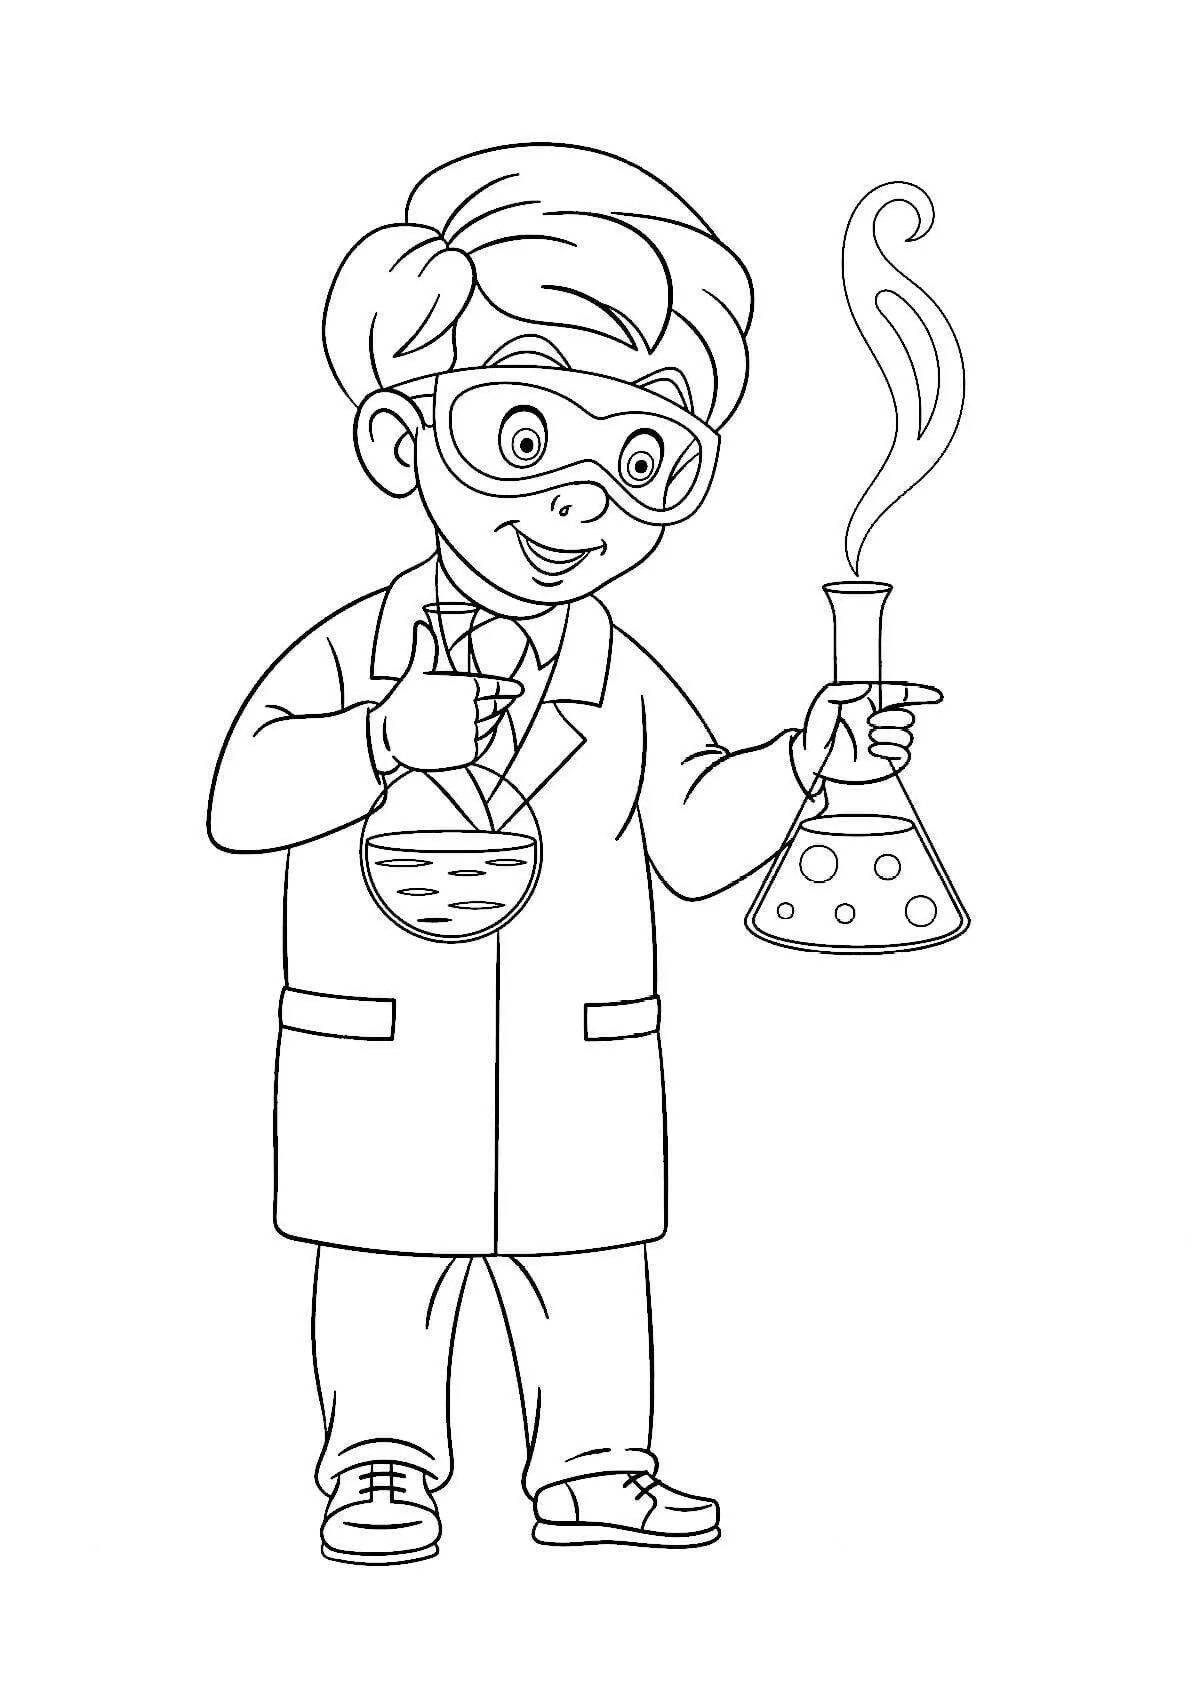 Children's coloring pages for scientists